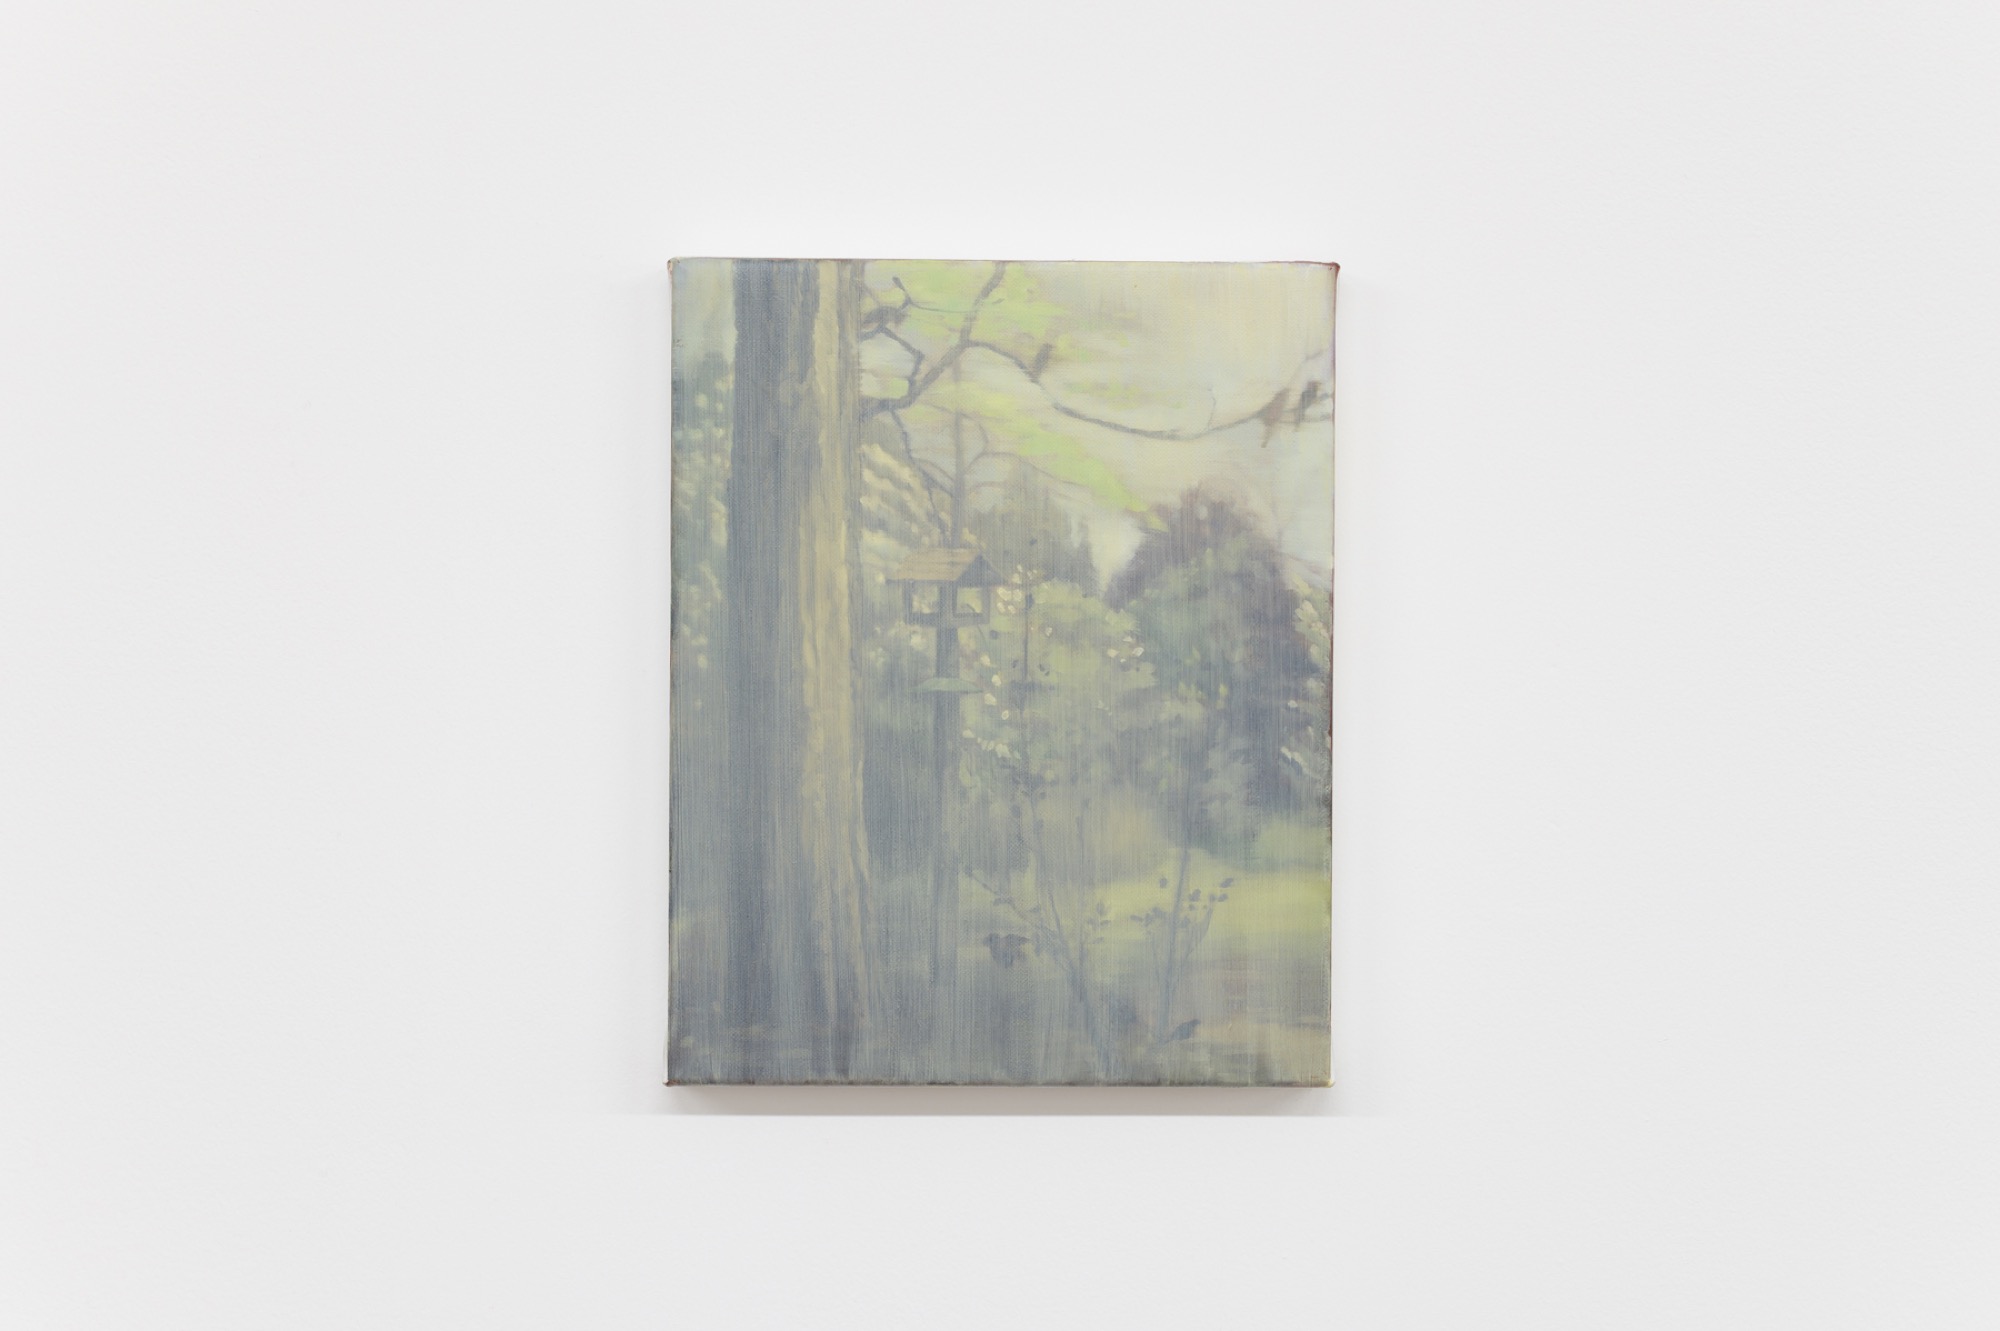 Kate Wallace, <em>Views of trees and birds #1</em>, 2019, oil on linen, 25 x 20cm, photo: Aaron Christopher Rees